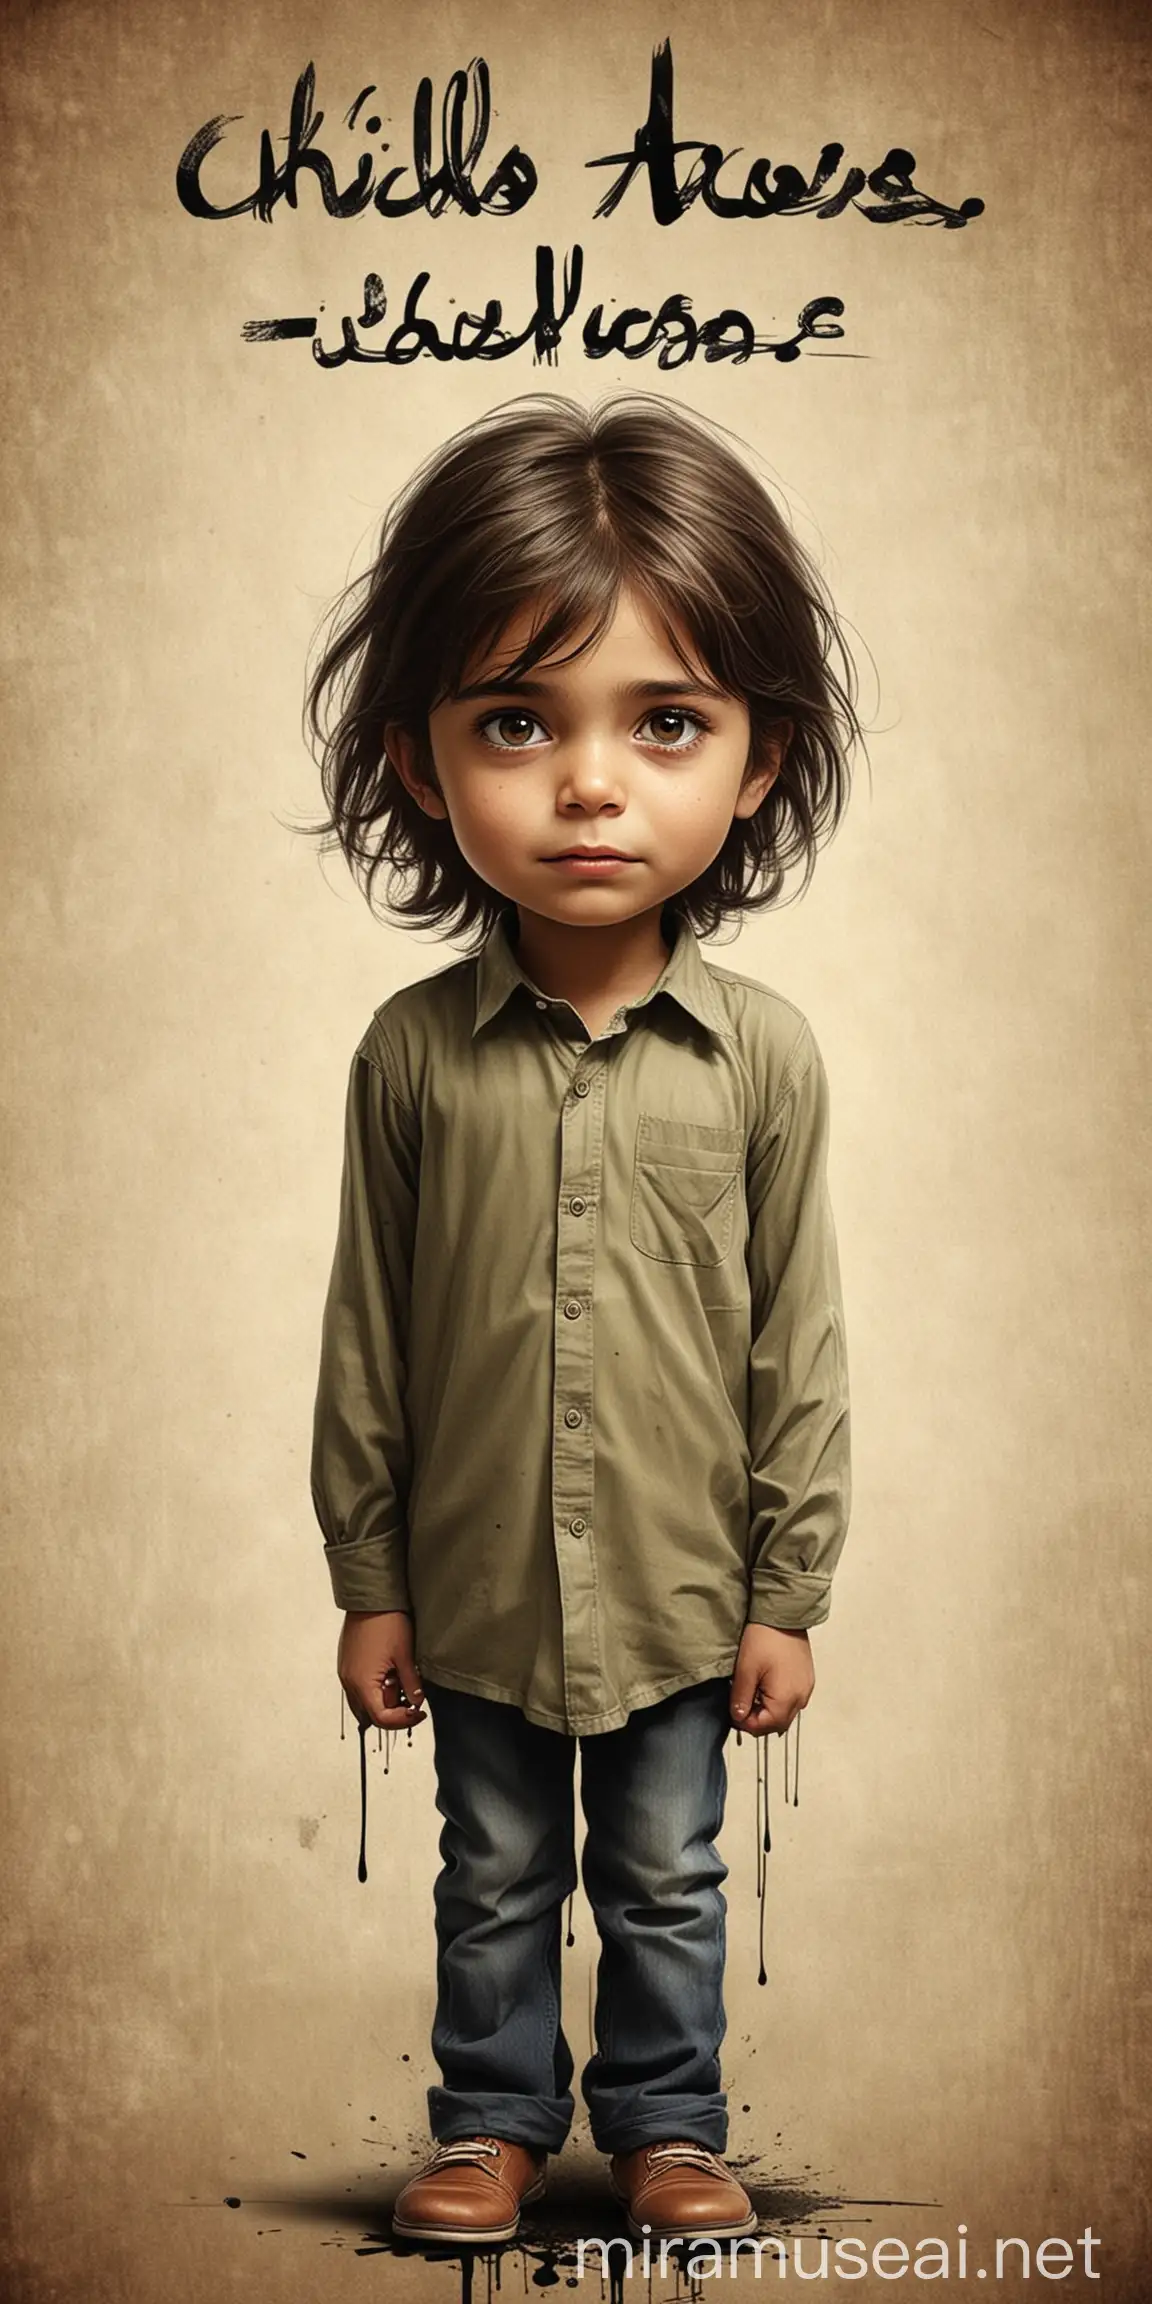 Awareness Poster Against Child Abuse in Pakistan